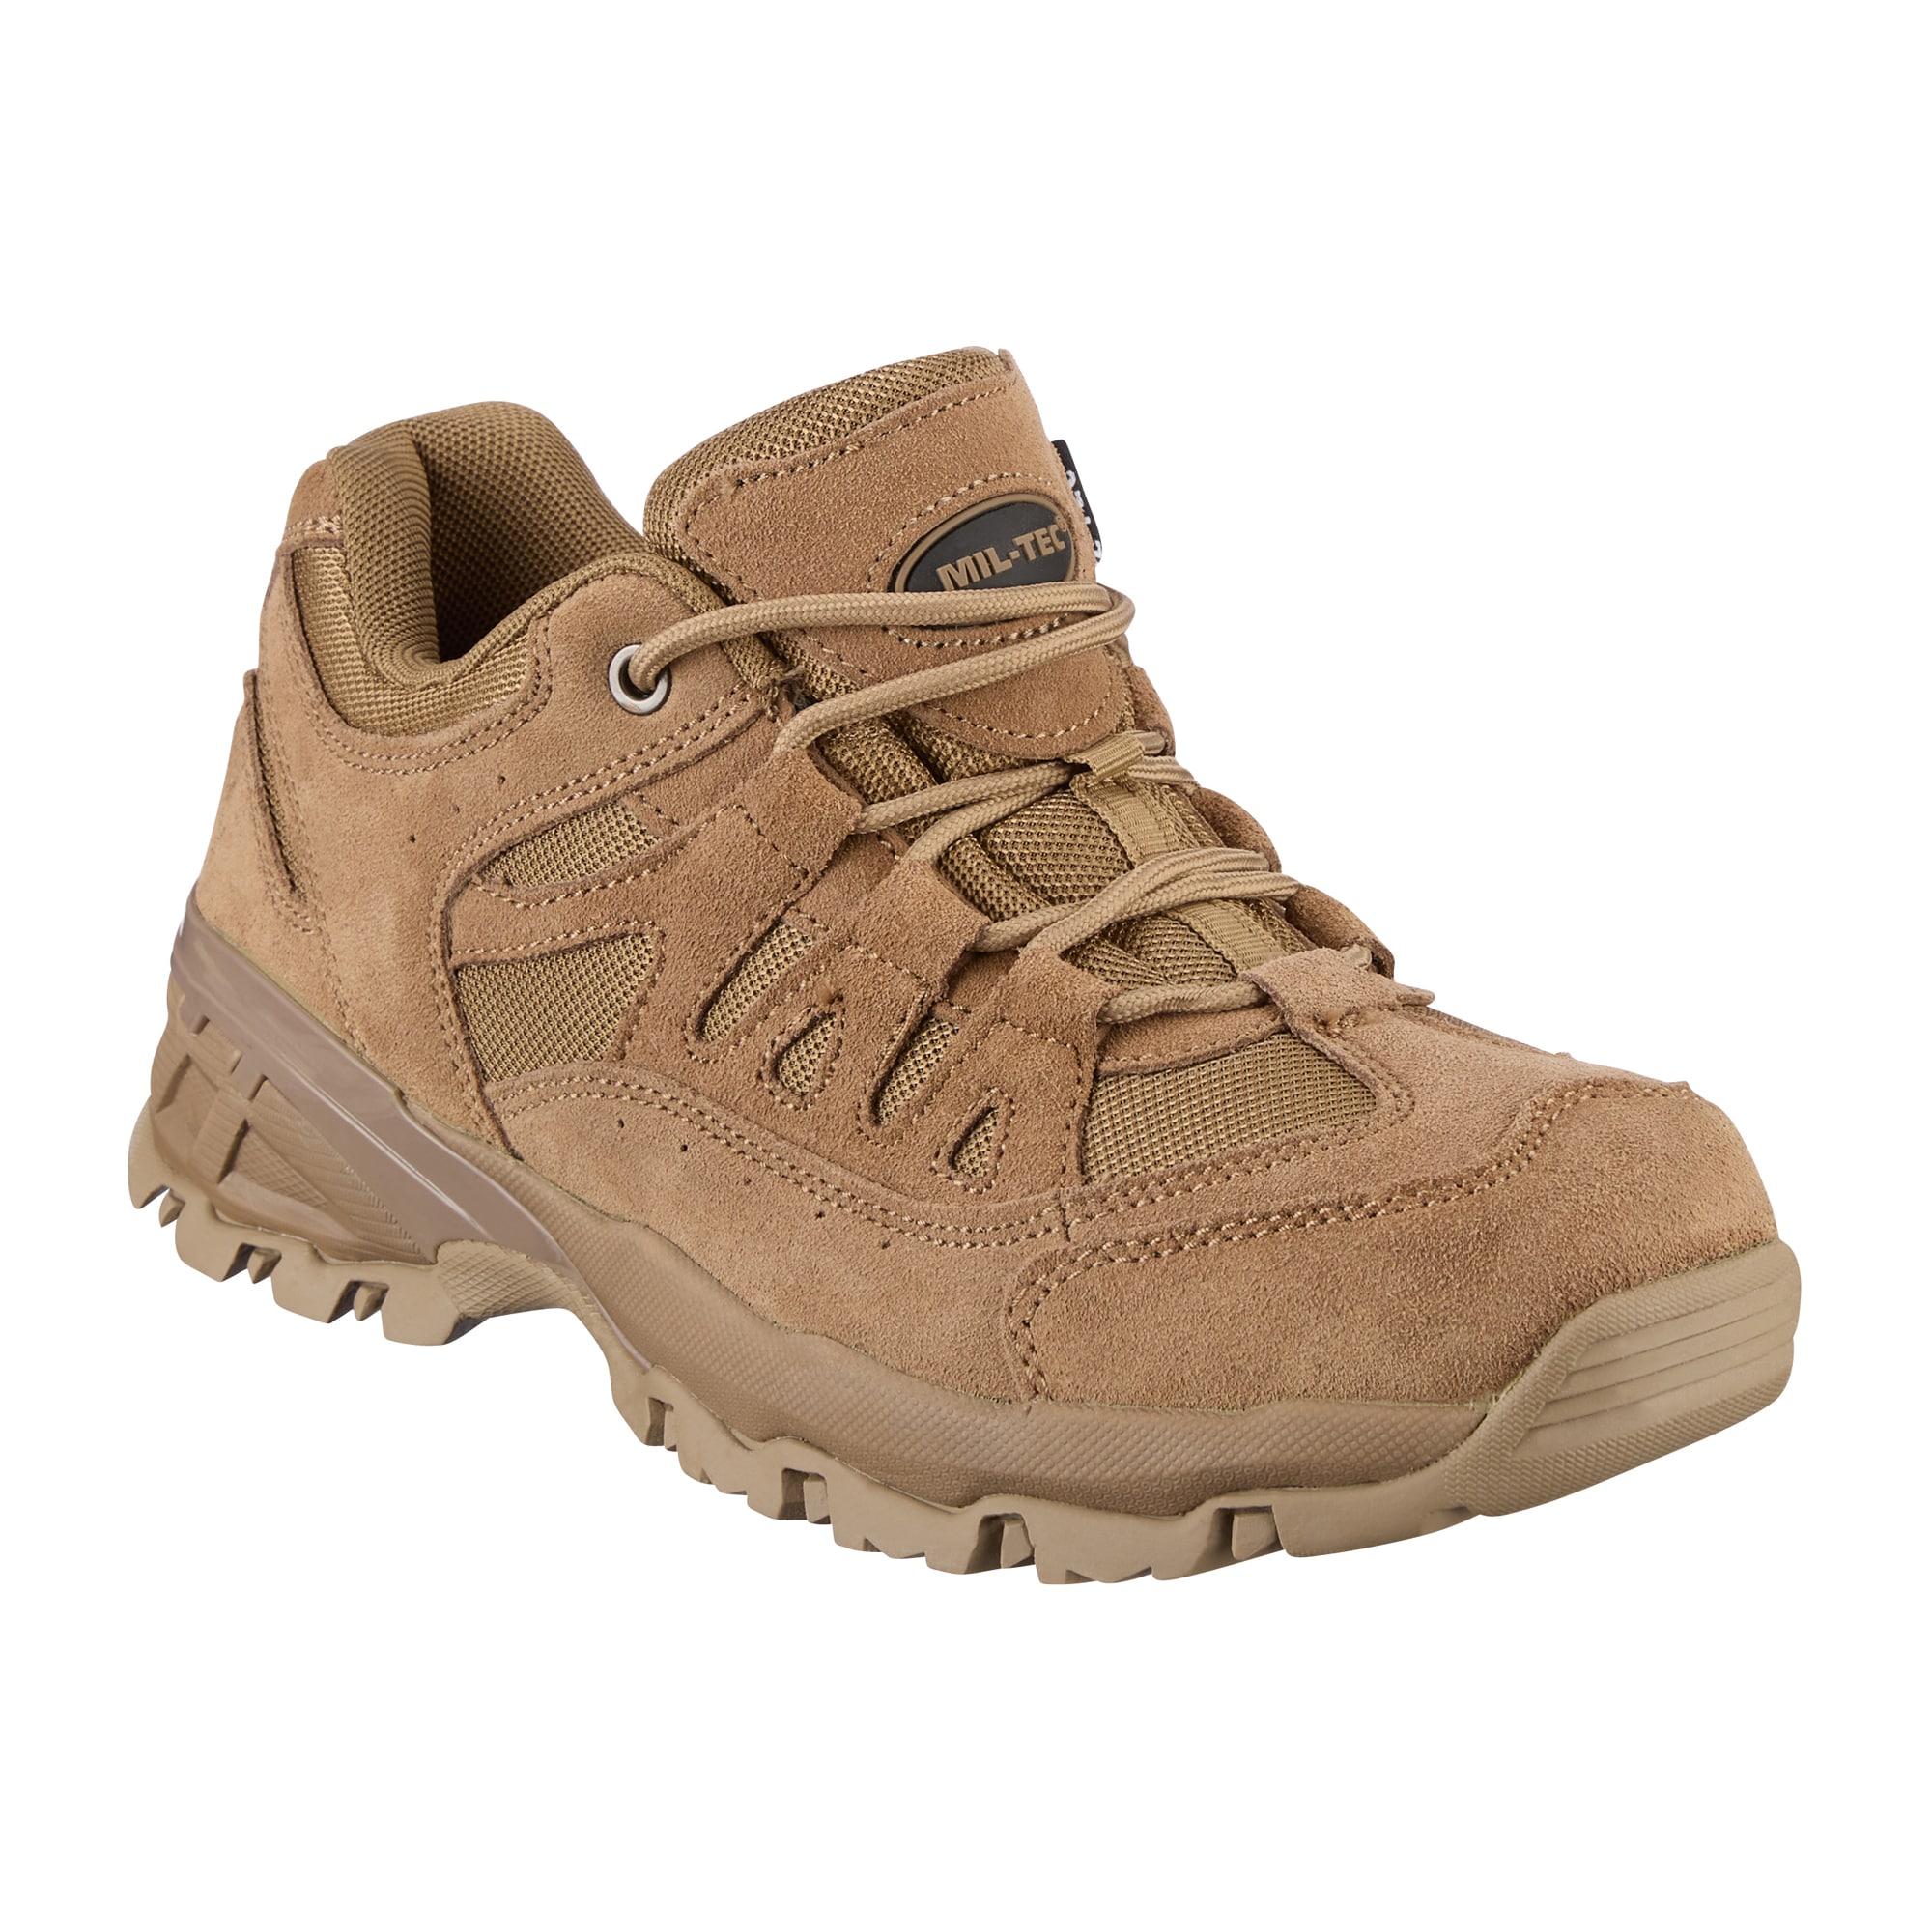 Purchase the Mil-Tec Shoe Paratrooper 2.5 coyote ASMC